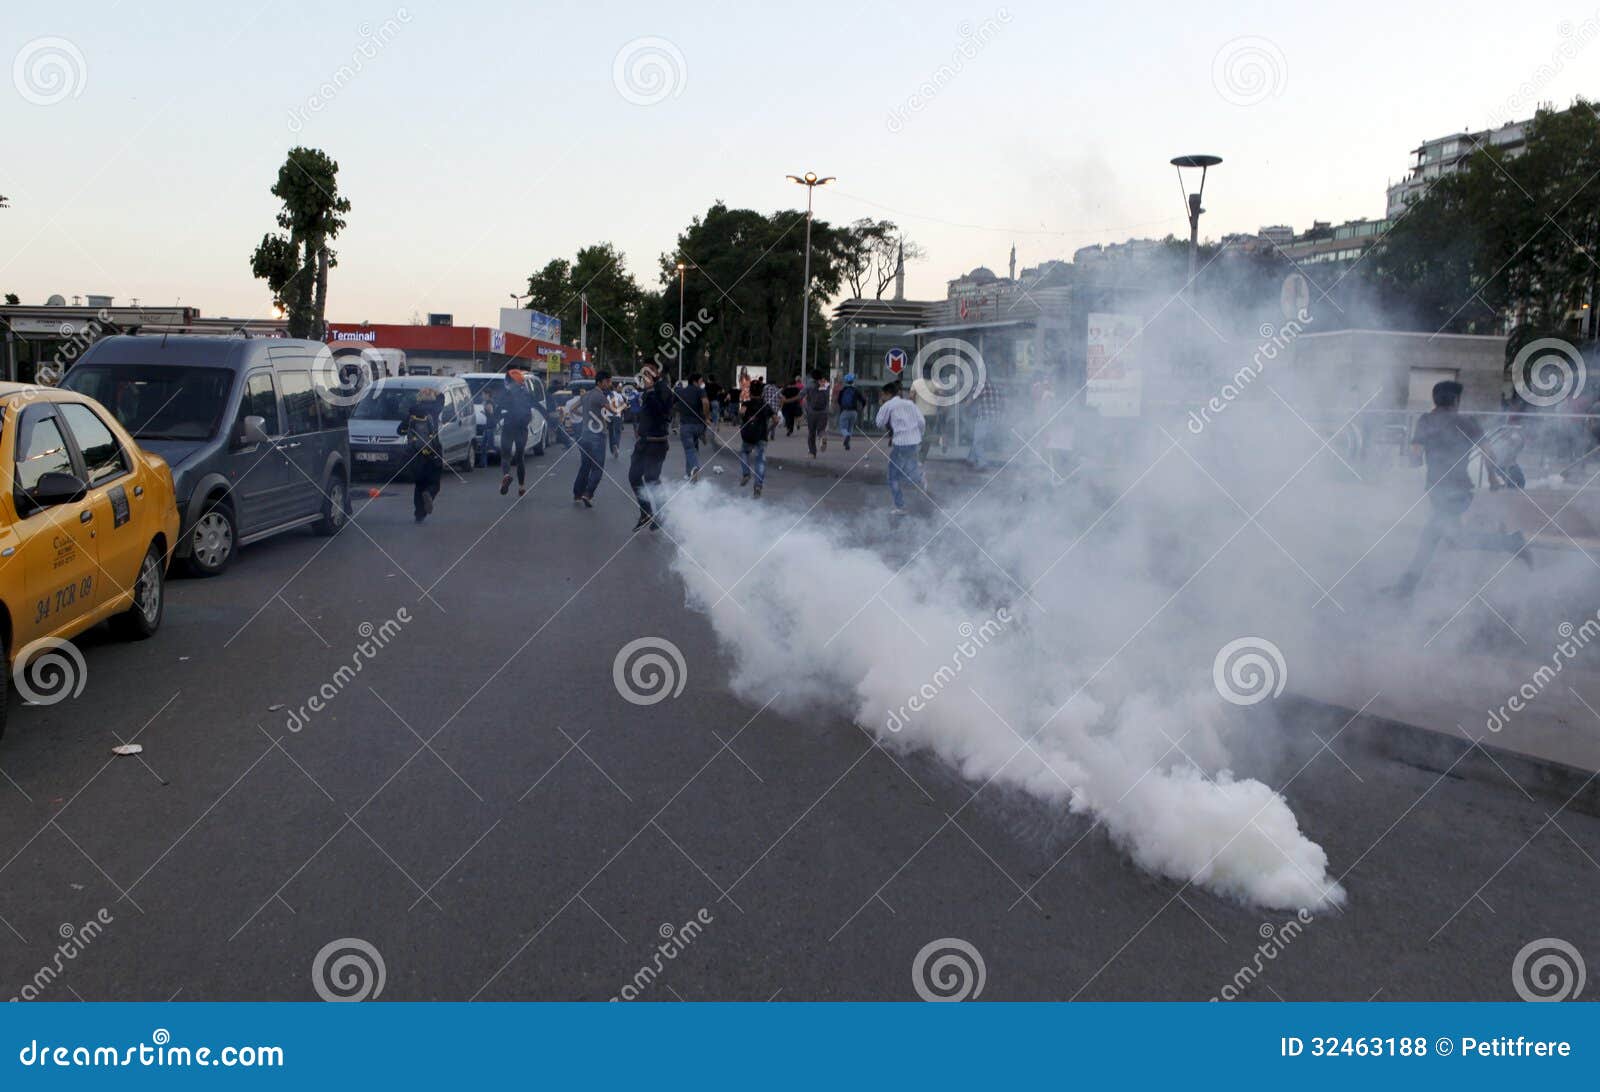 Gezi Park Protests In Istanbul Editorial Stock Photo Image Of Rain